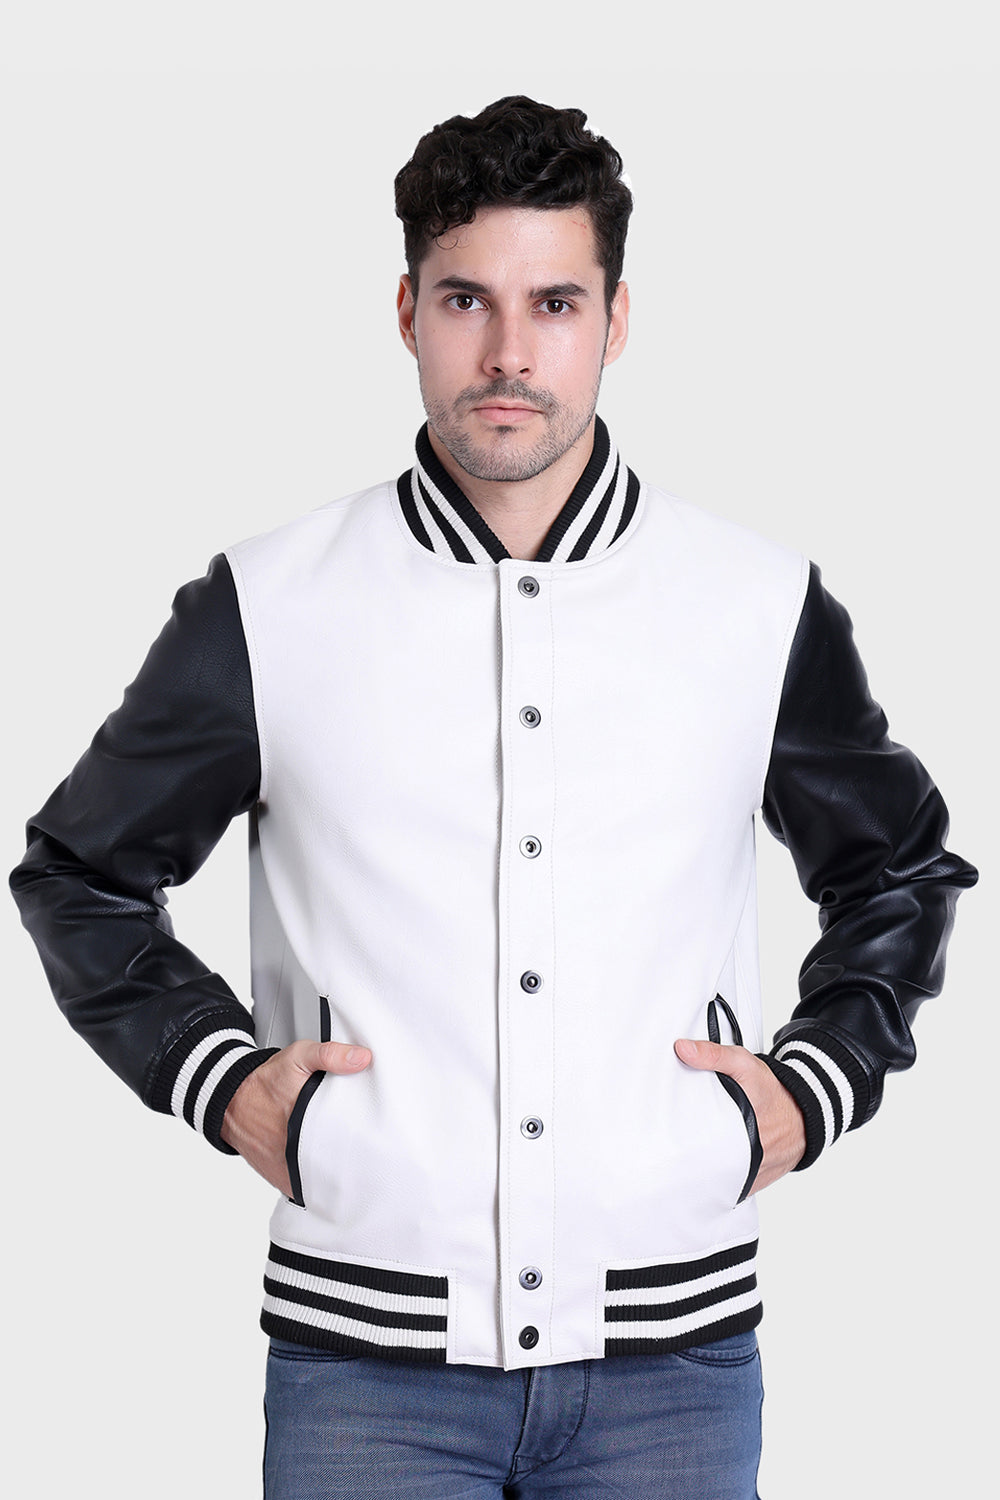 Justanned Pearl White Bomber Leather Jacket